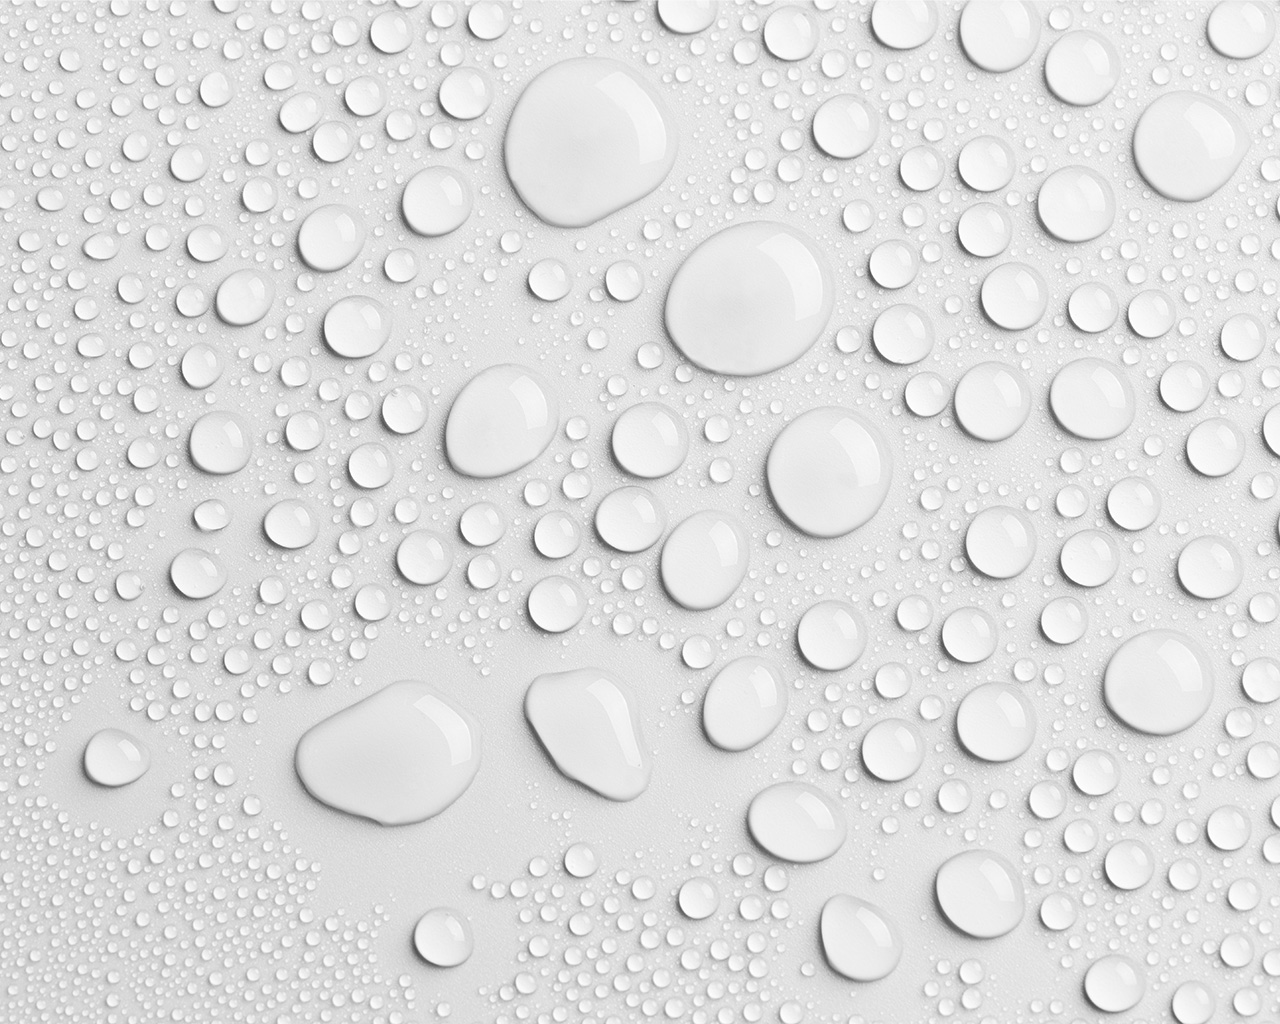 Water droplets on a grey background